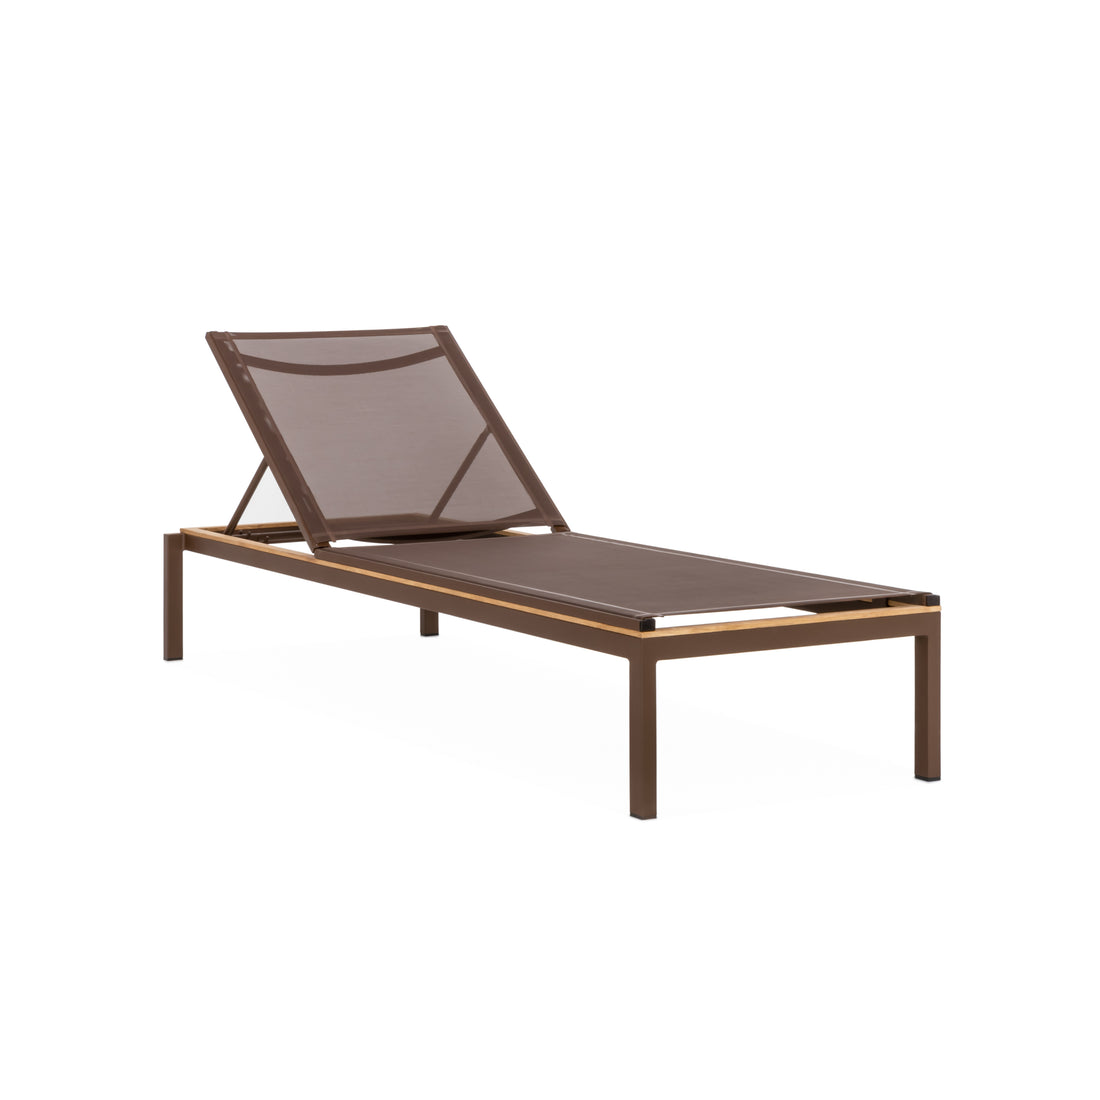 Abacos Stacking Chaise Lounge